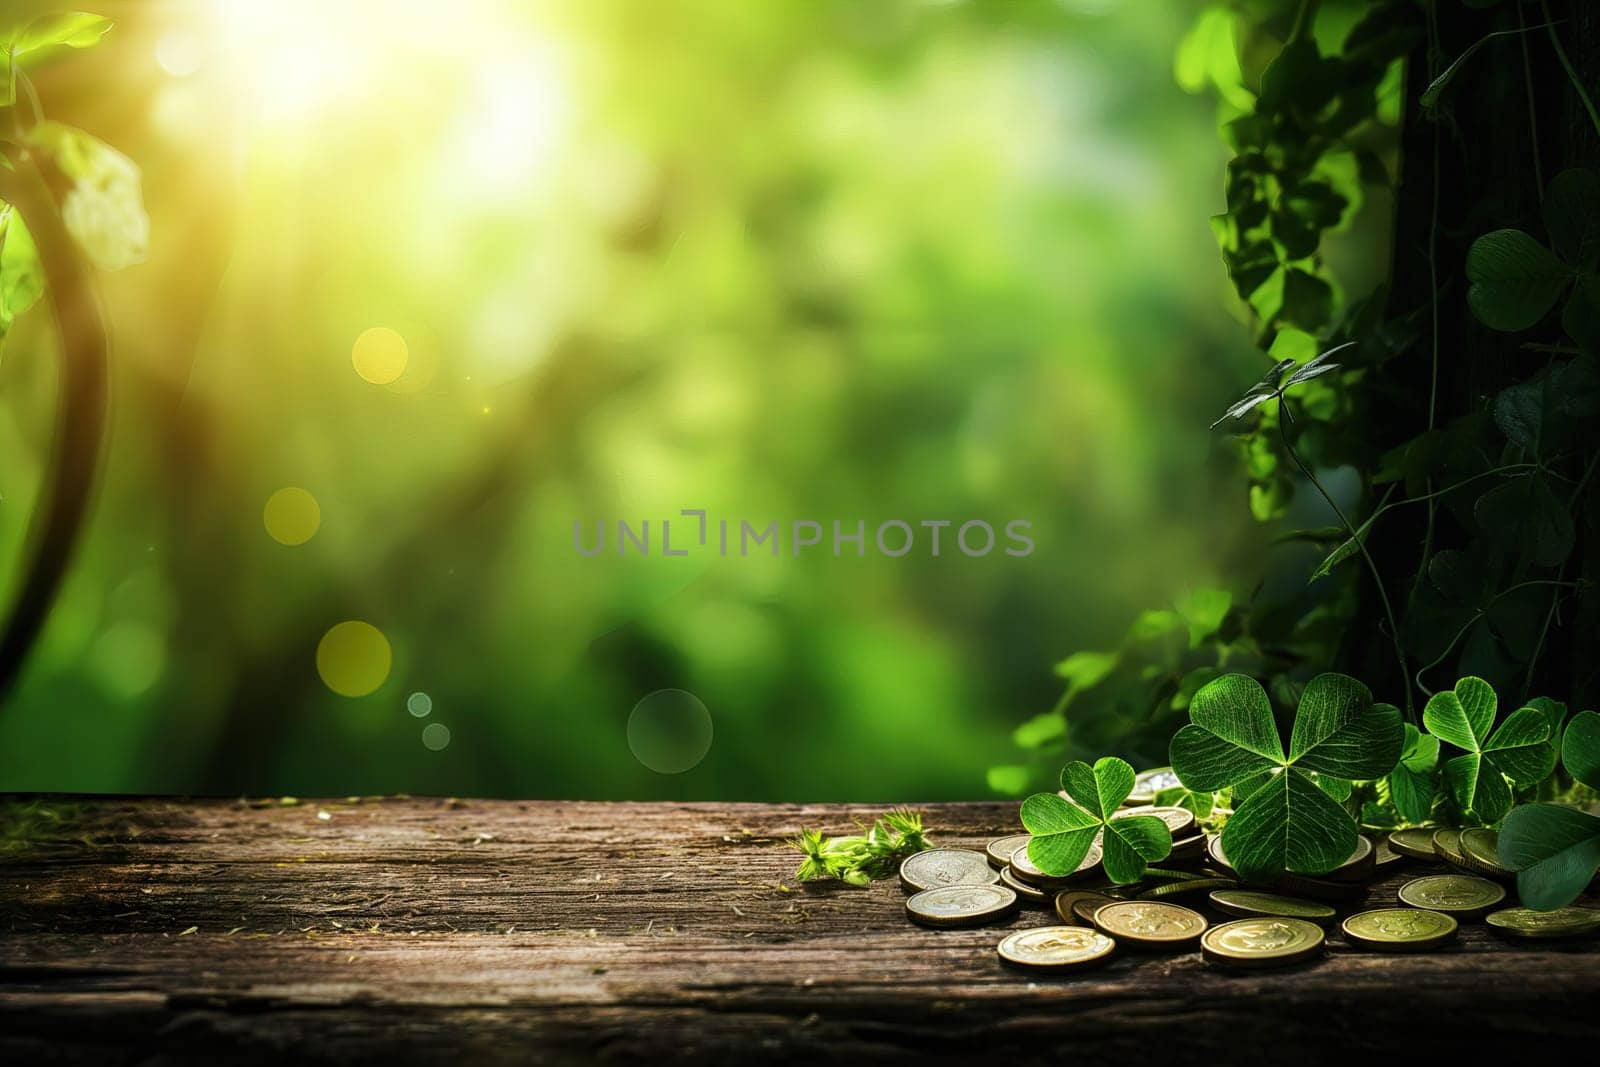 Golden coins on wood table with clover arc background by Dustick